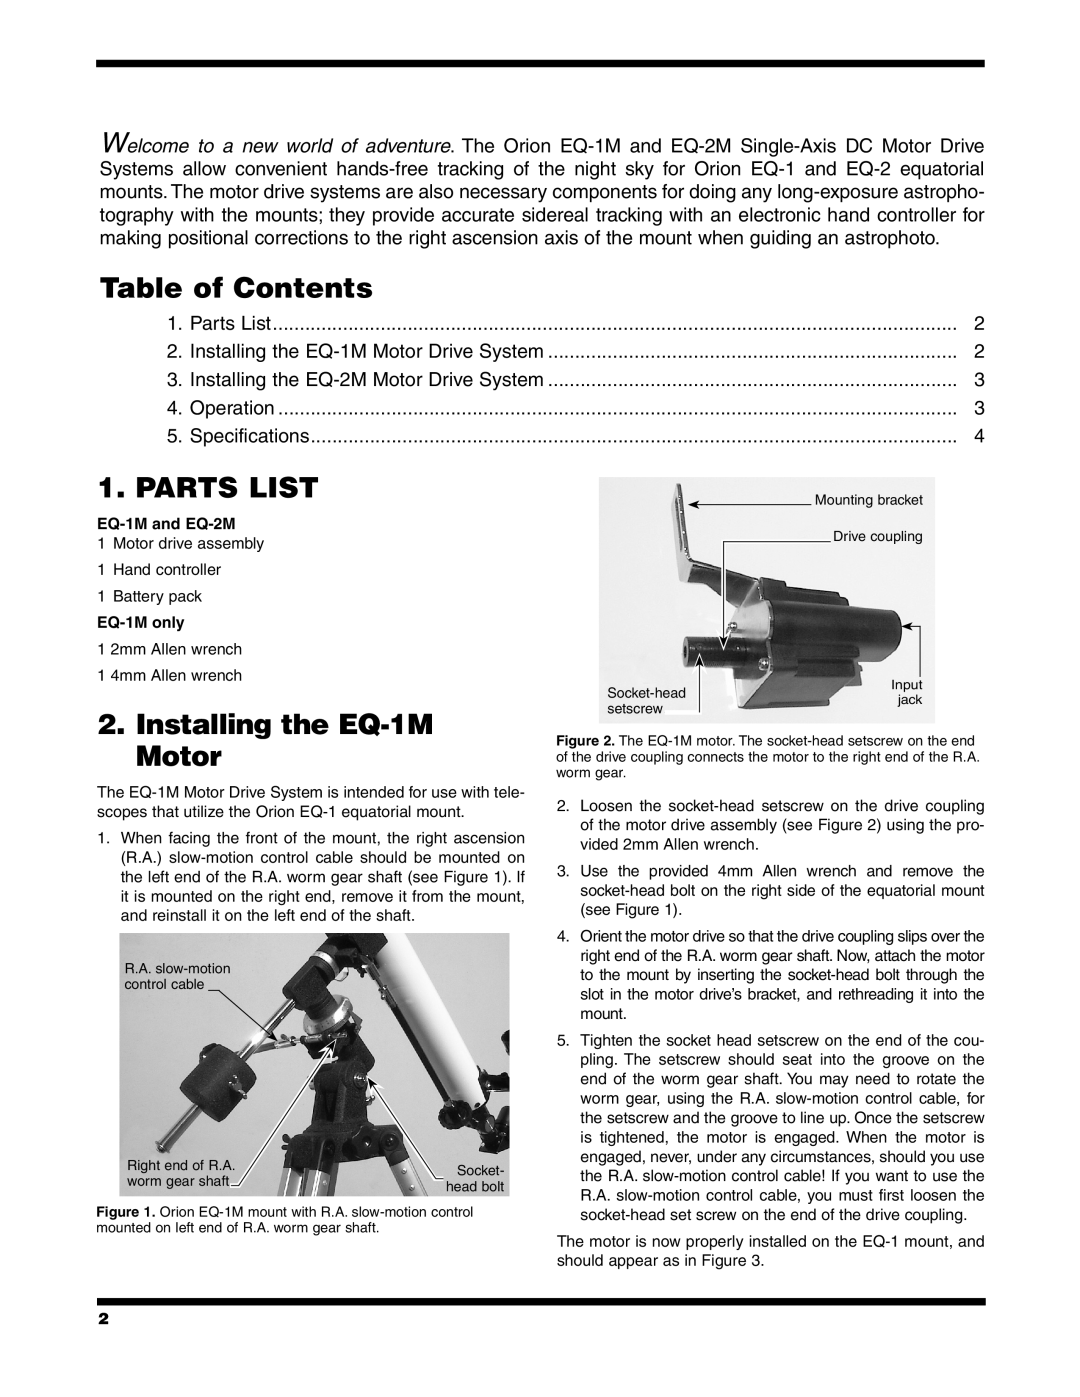 Orion Table of Contents, Parts List, Installing the EQ-1M, Motor, EQ-1M and EQ-2M, EQ-1M only, Operation 